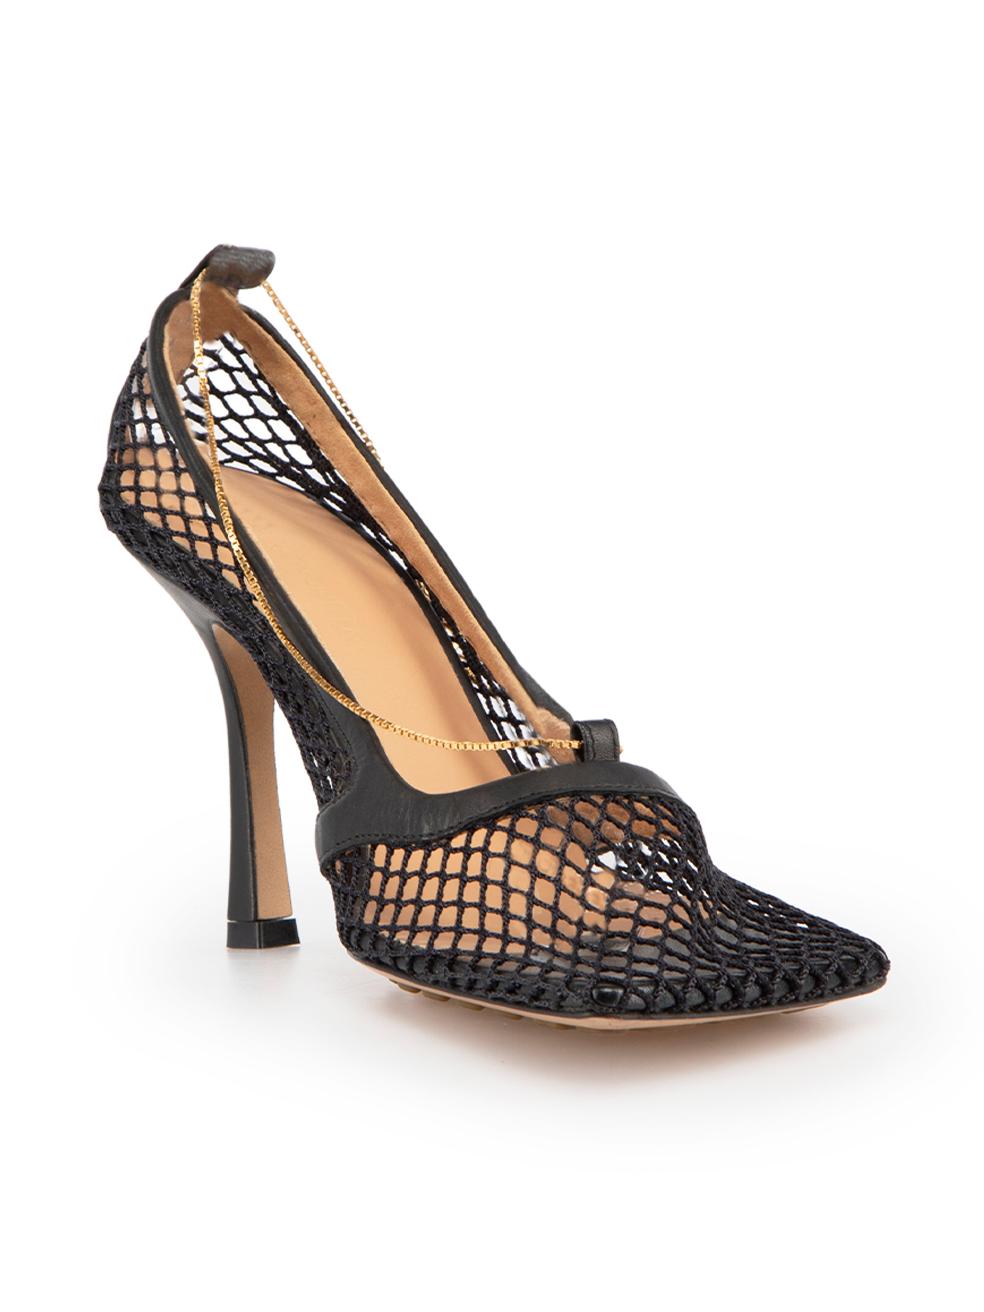 CONDITION is Very good. Minimal wear to shoes is evident. Minimal wear to the footbed with dark marks towards the heels on this used Bottega Veneta designer resale item.
 
 Details
 Stretch
 Black
 Cloth mesh
 Sandals
 Square toe
 High heel
 Chain